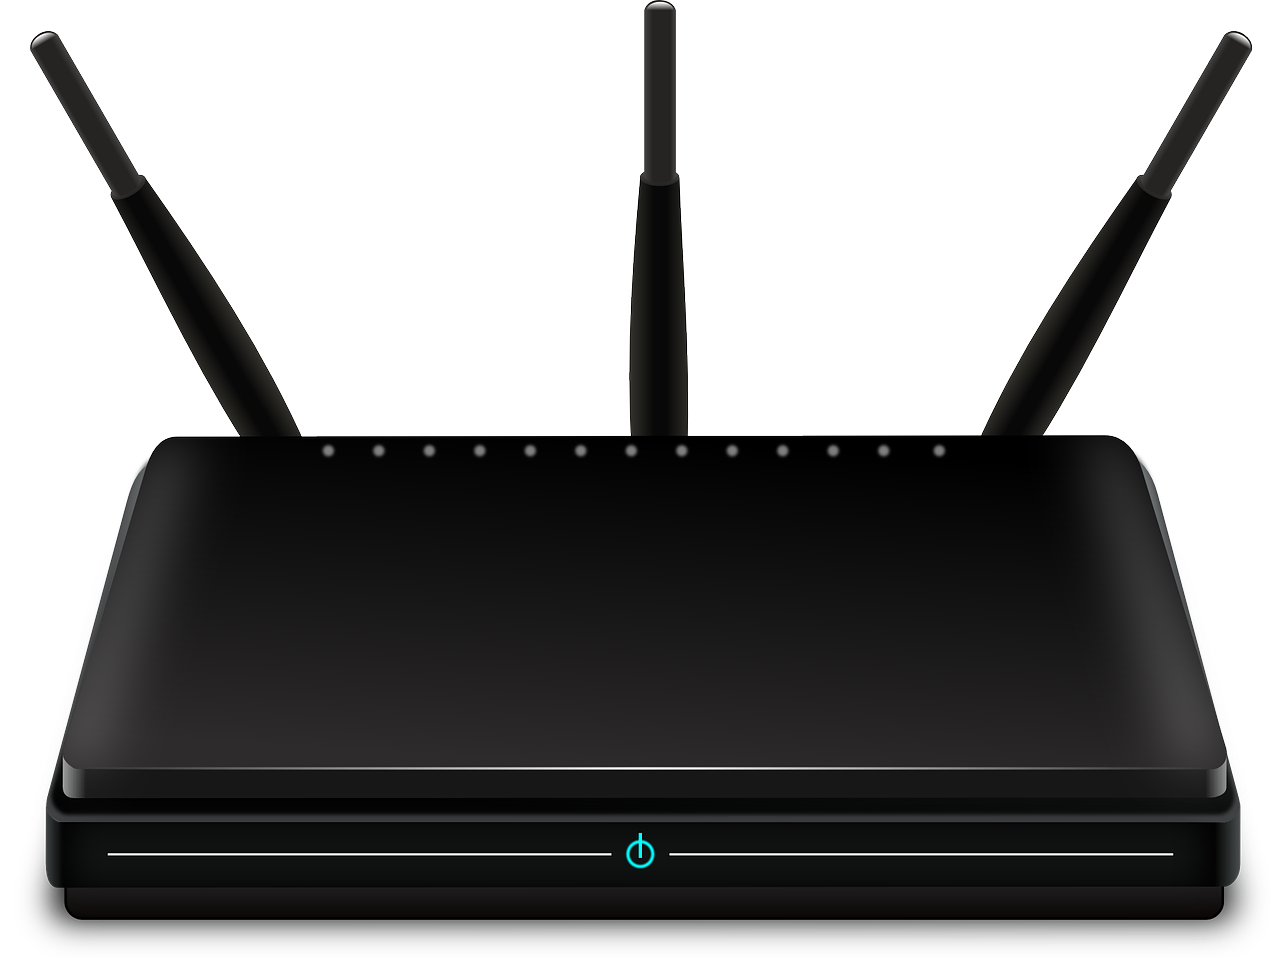 7 Best Routers For Gaming in India - Powerful Processors, High-Speed